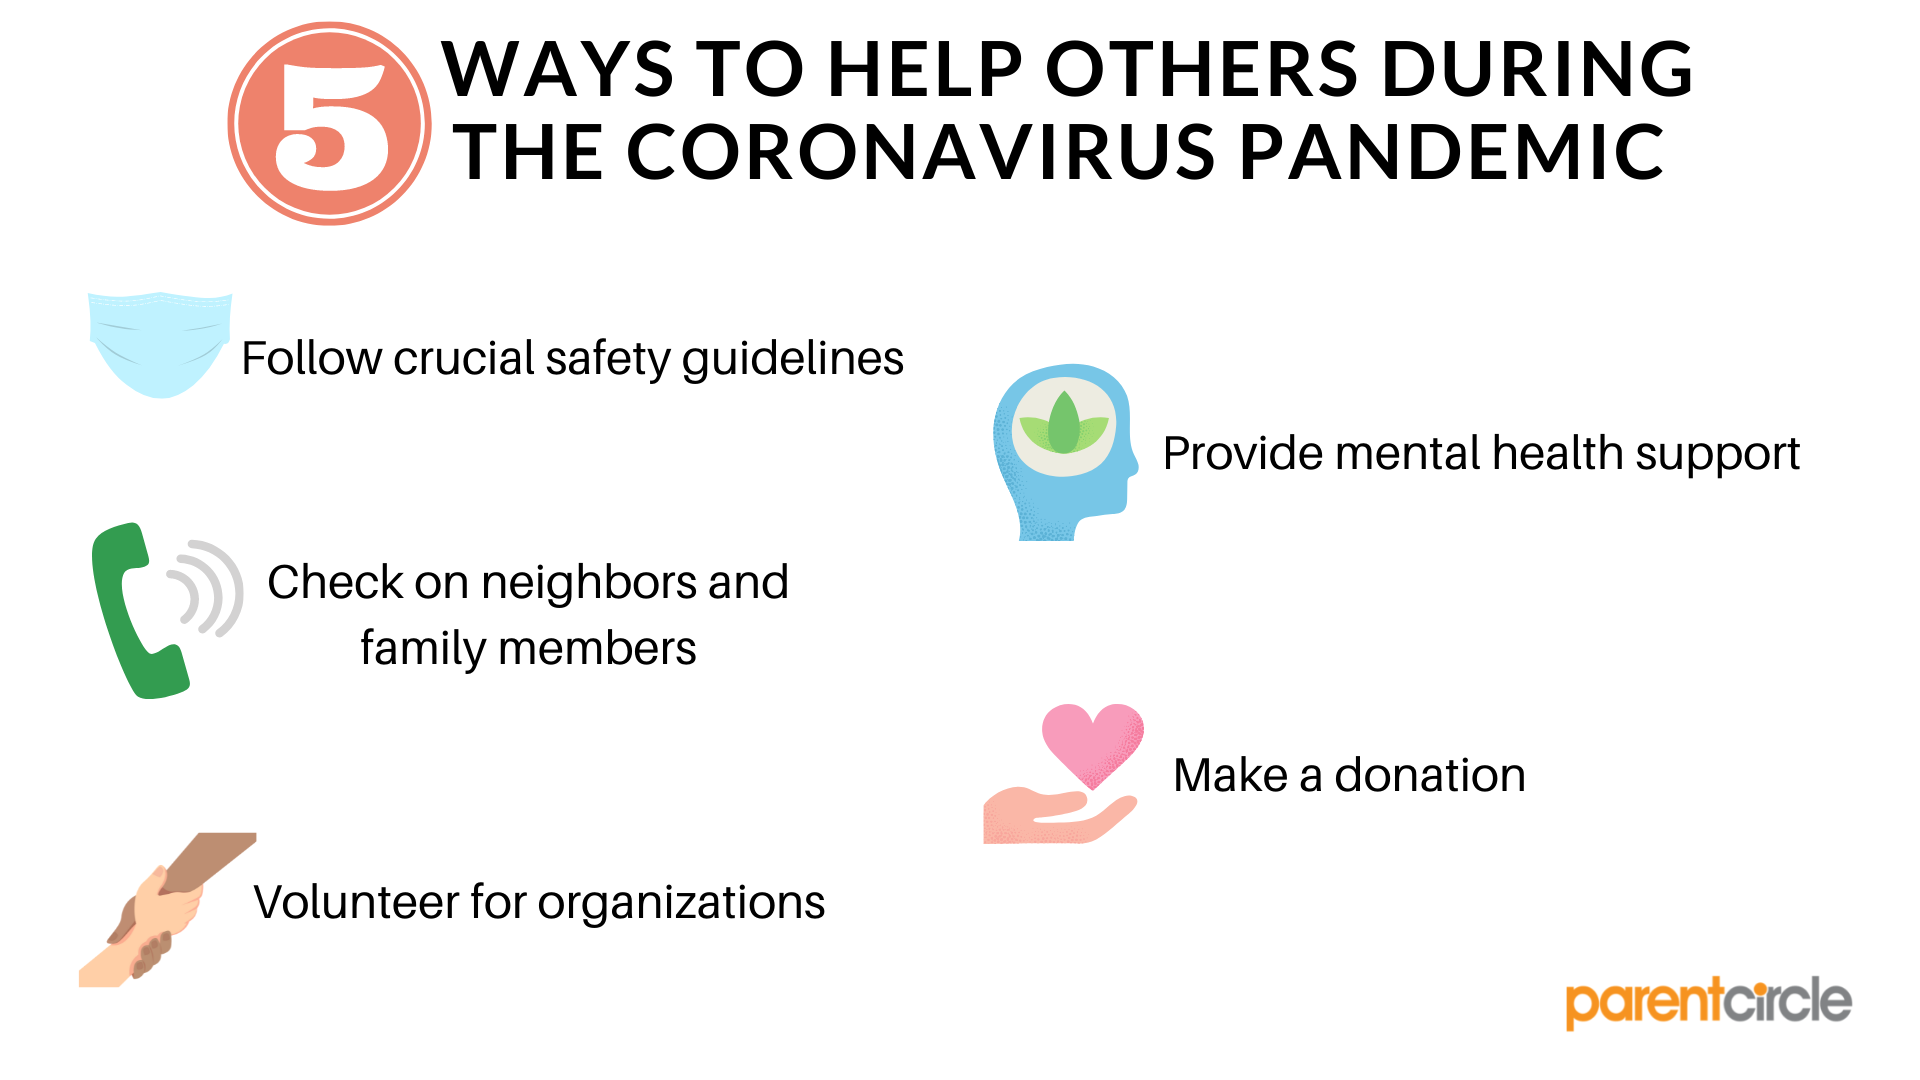 5 Ways To Help Others During The Coronavirus Pandemic